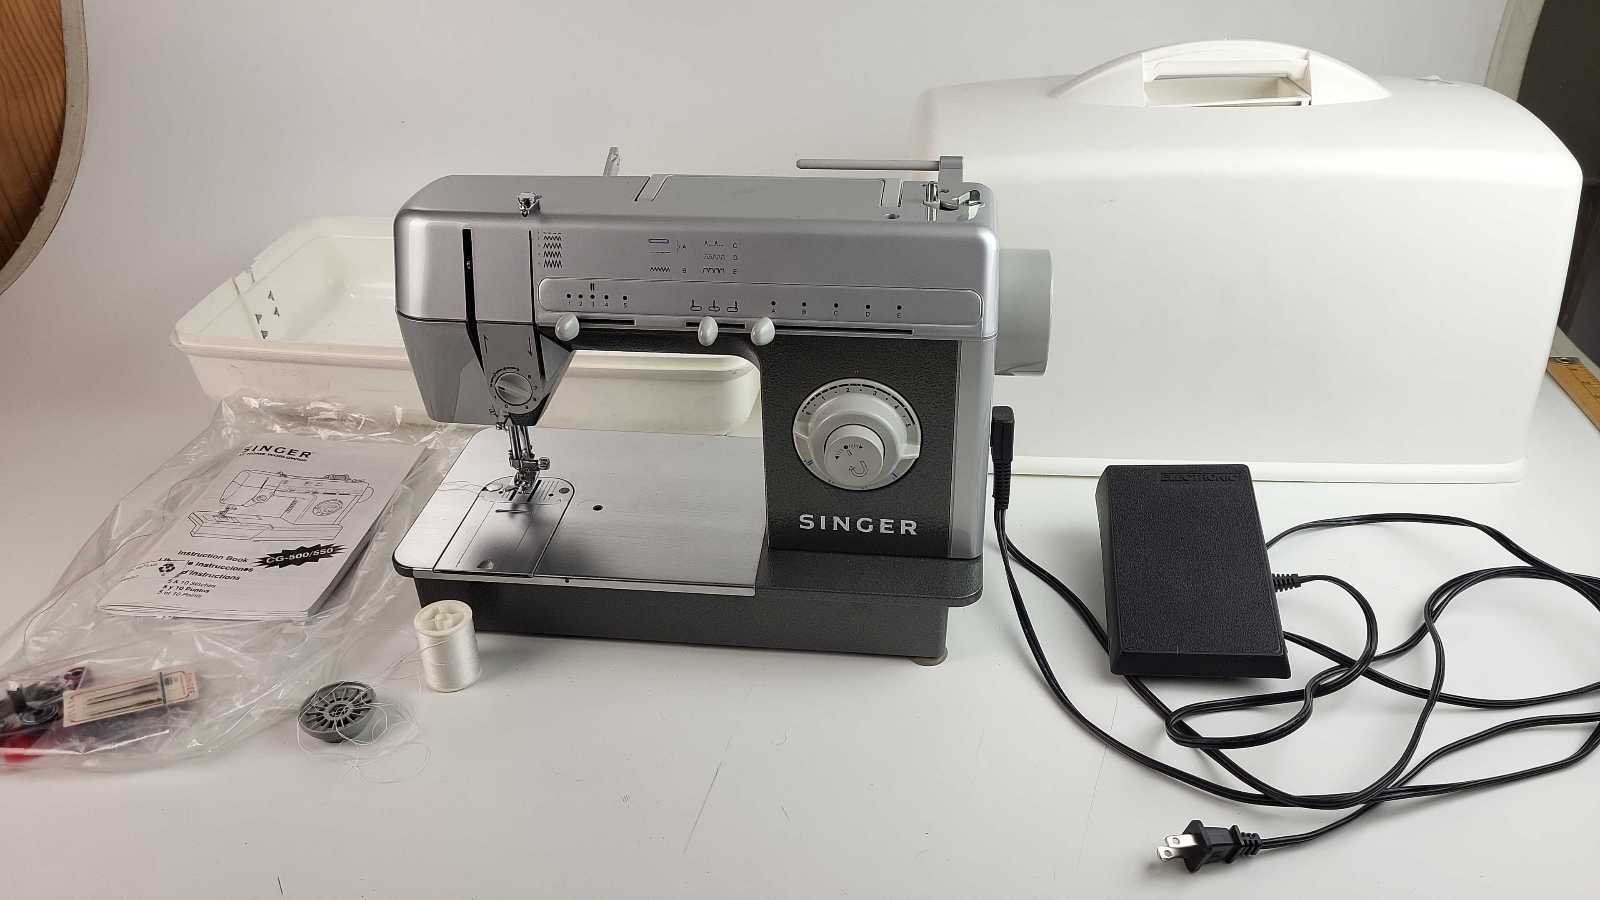 Singer CG 550 C sewing machine - Gray with white case - with pedal and manual